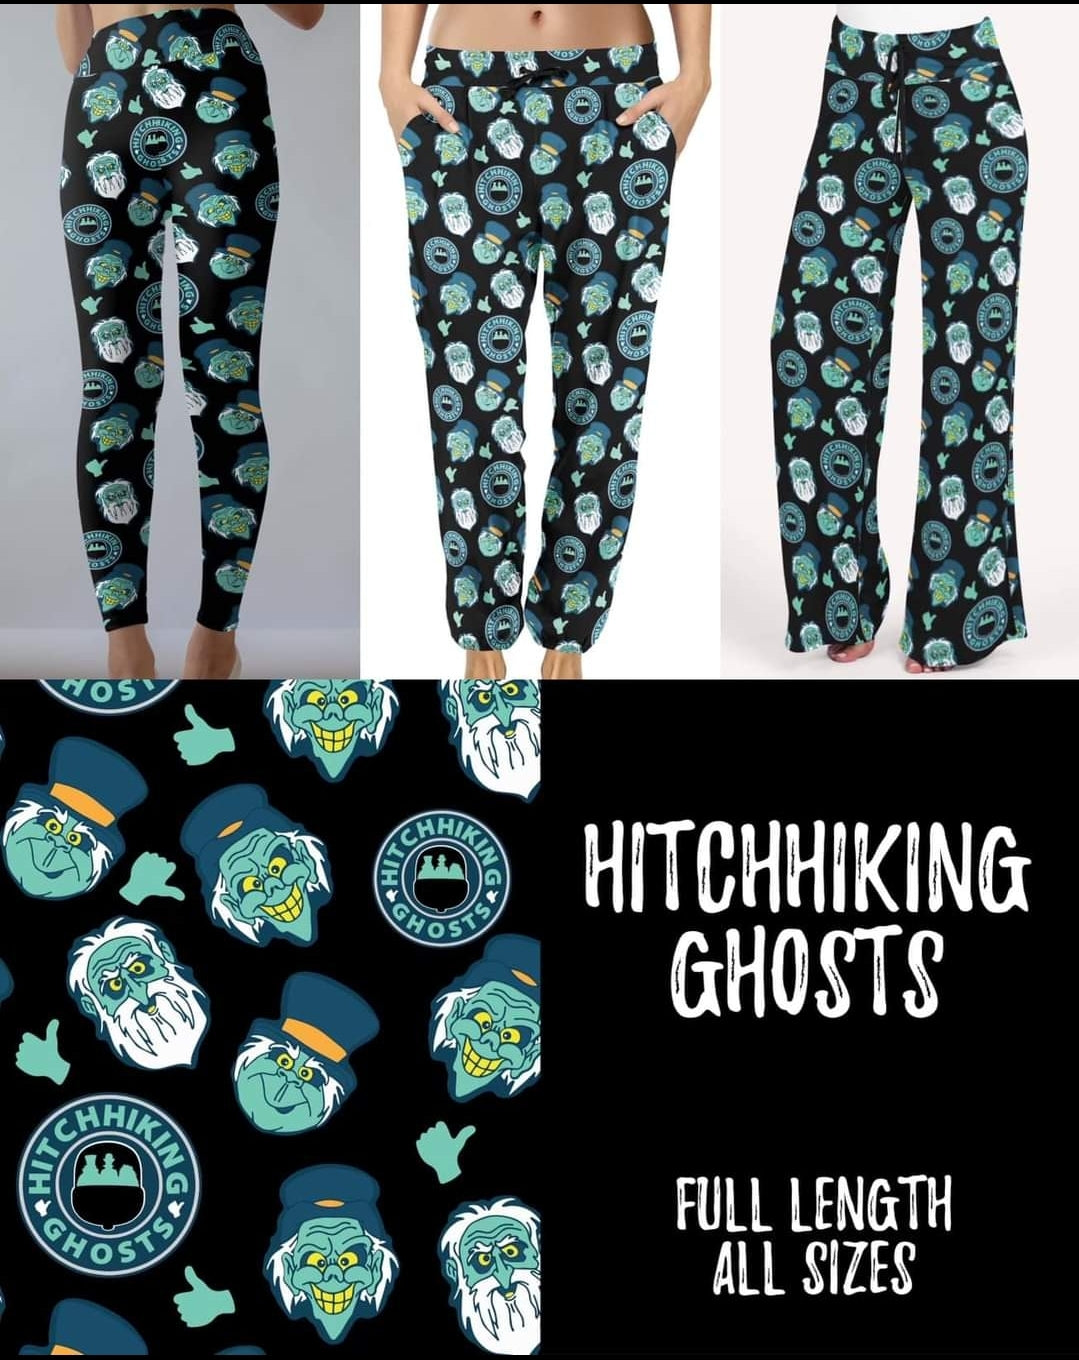 Hitchhiking Ghosts Leggings with or without Pockets